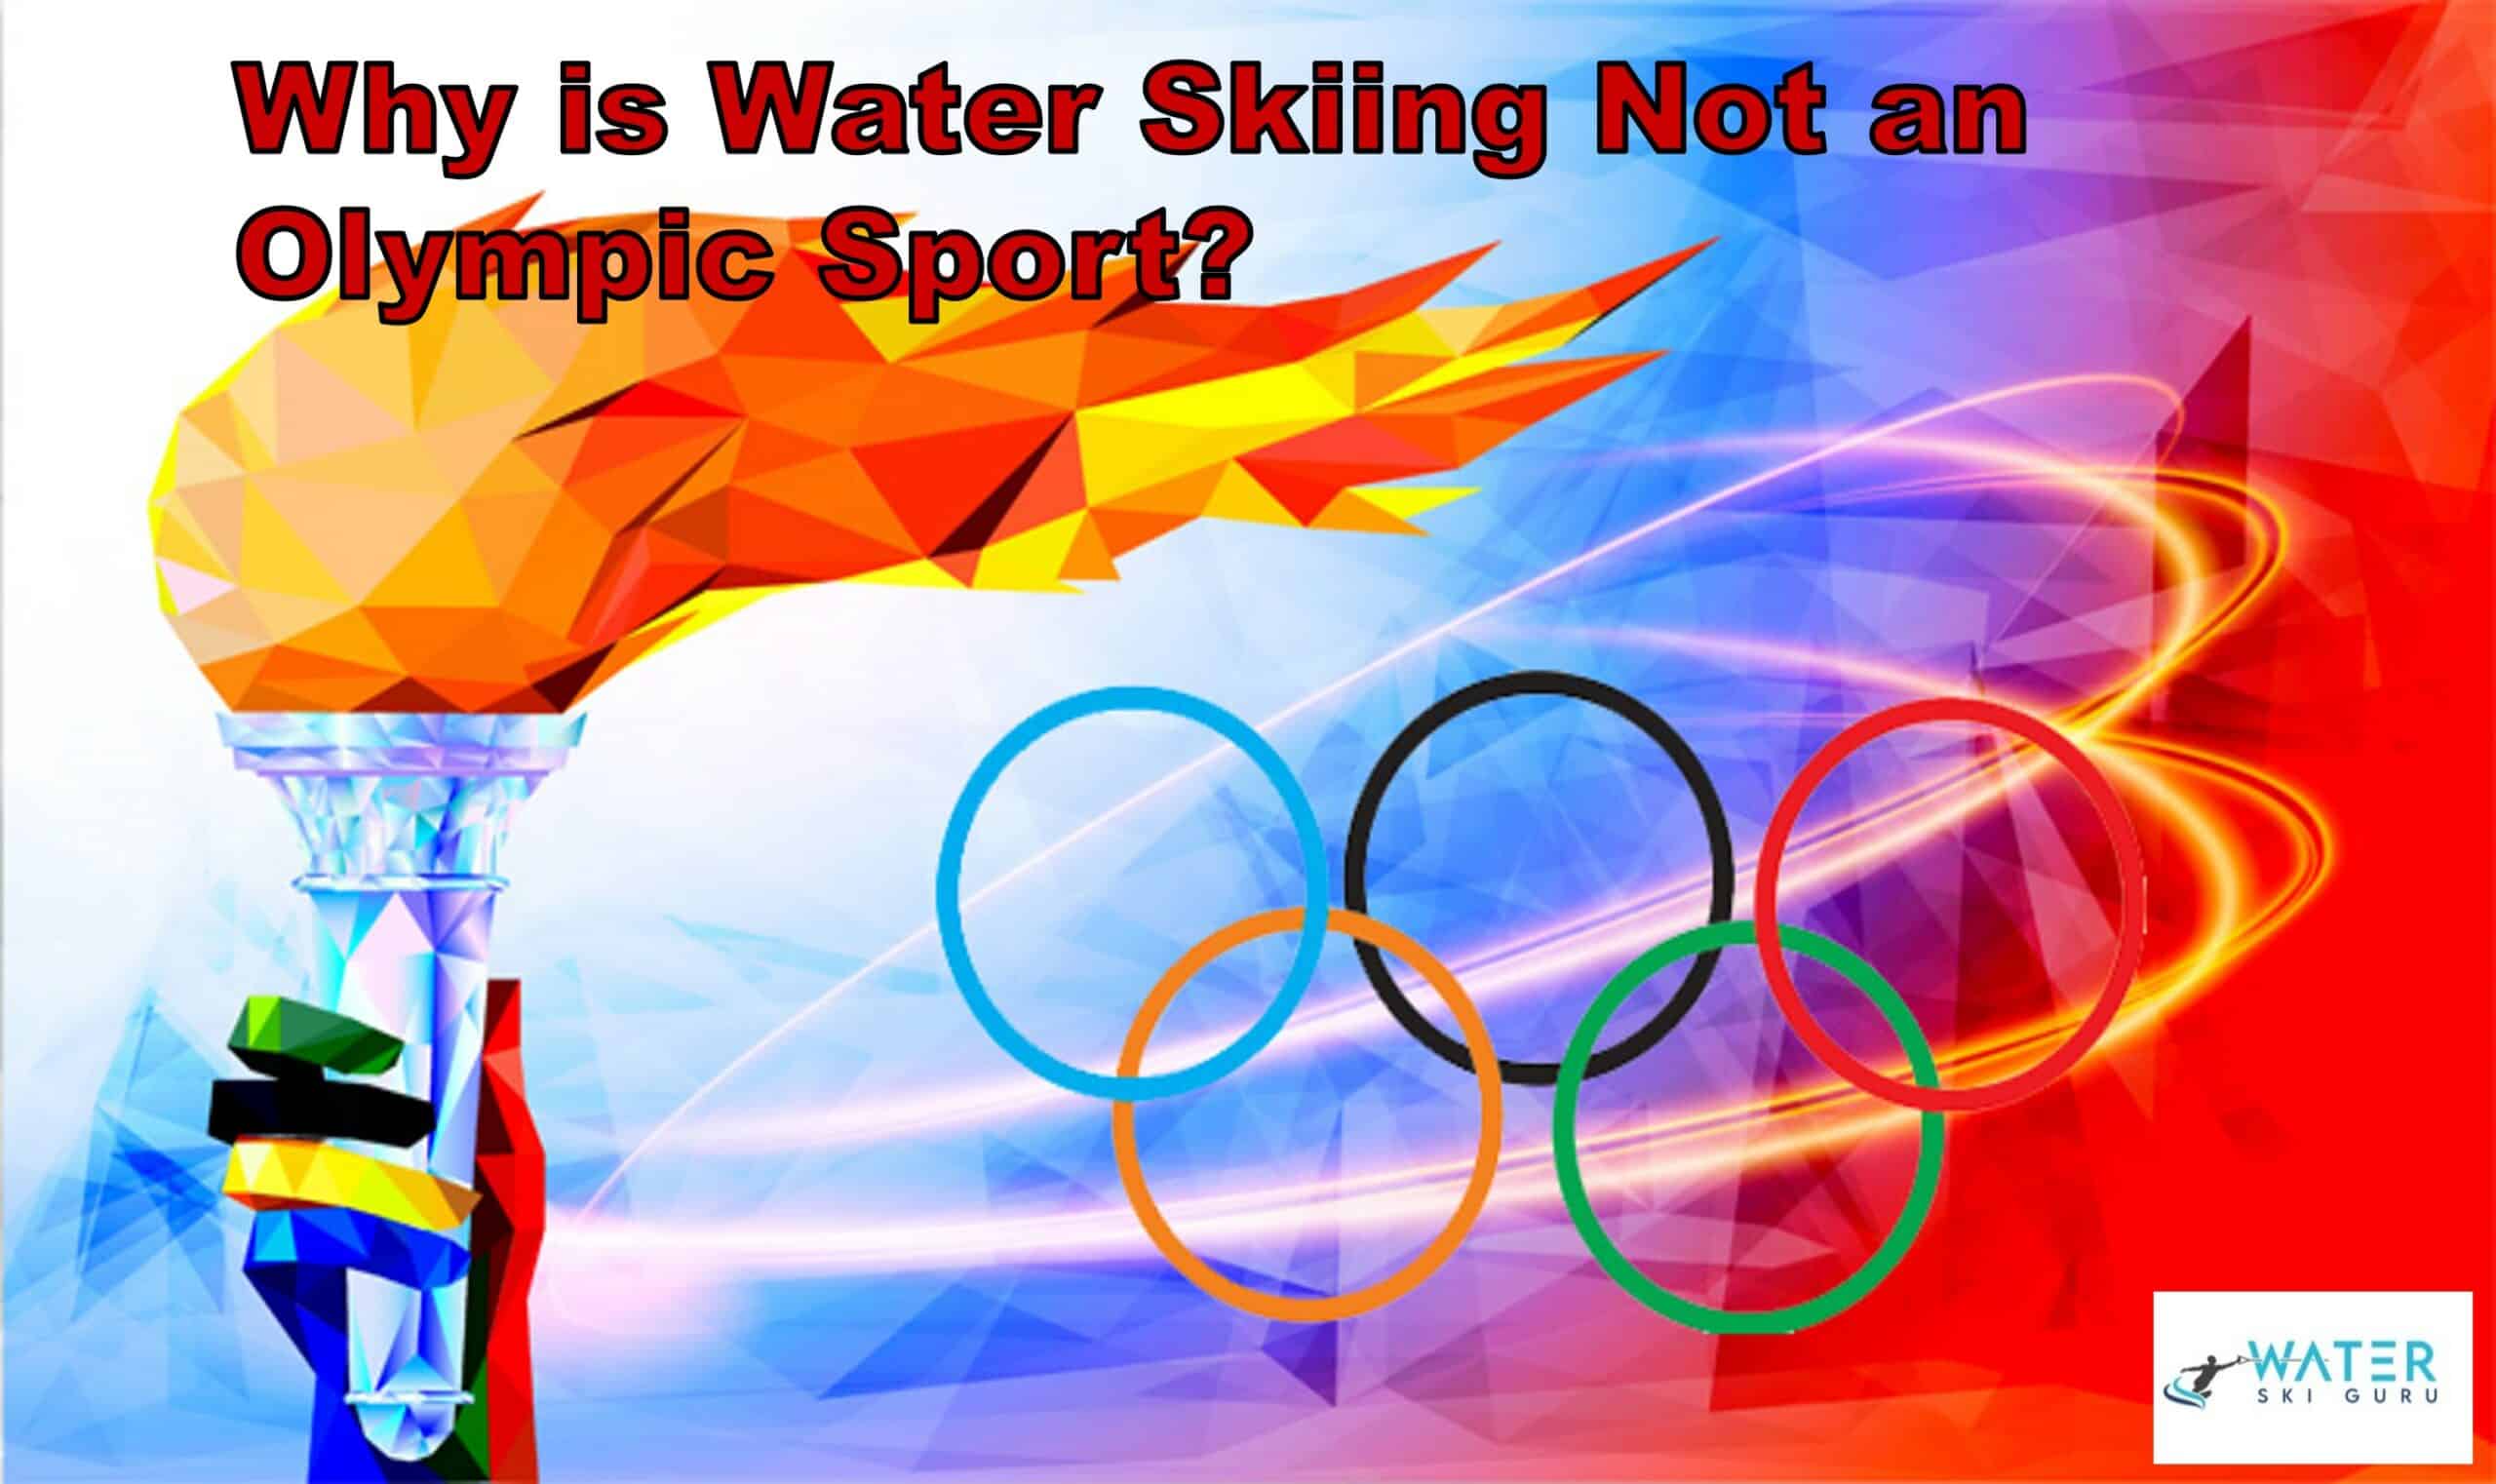 Why is Water Skiing Not an Olympic Sport